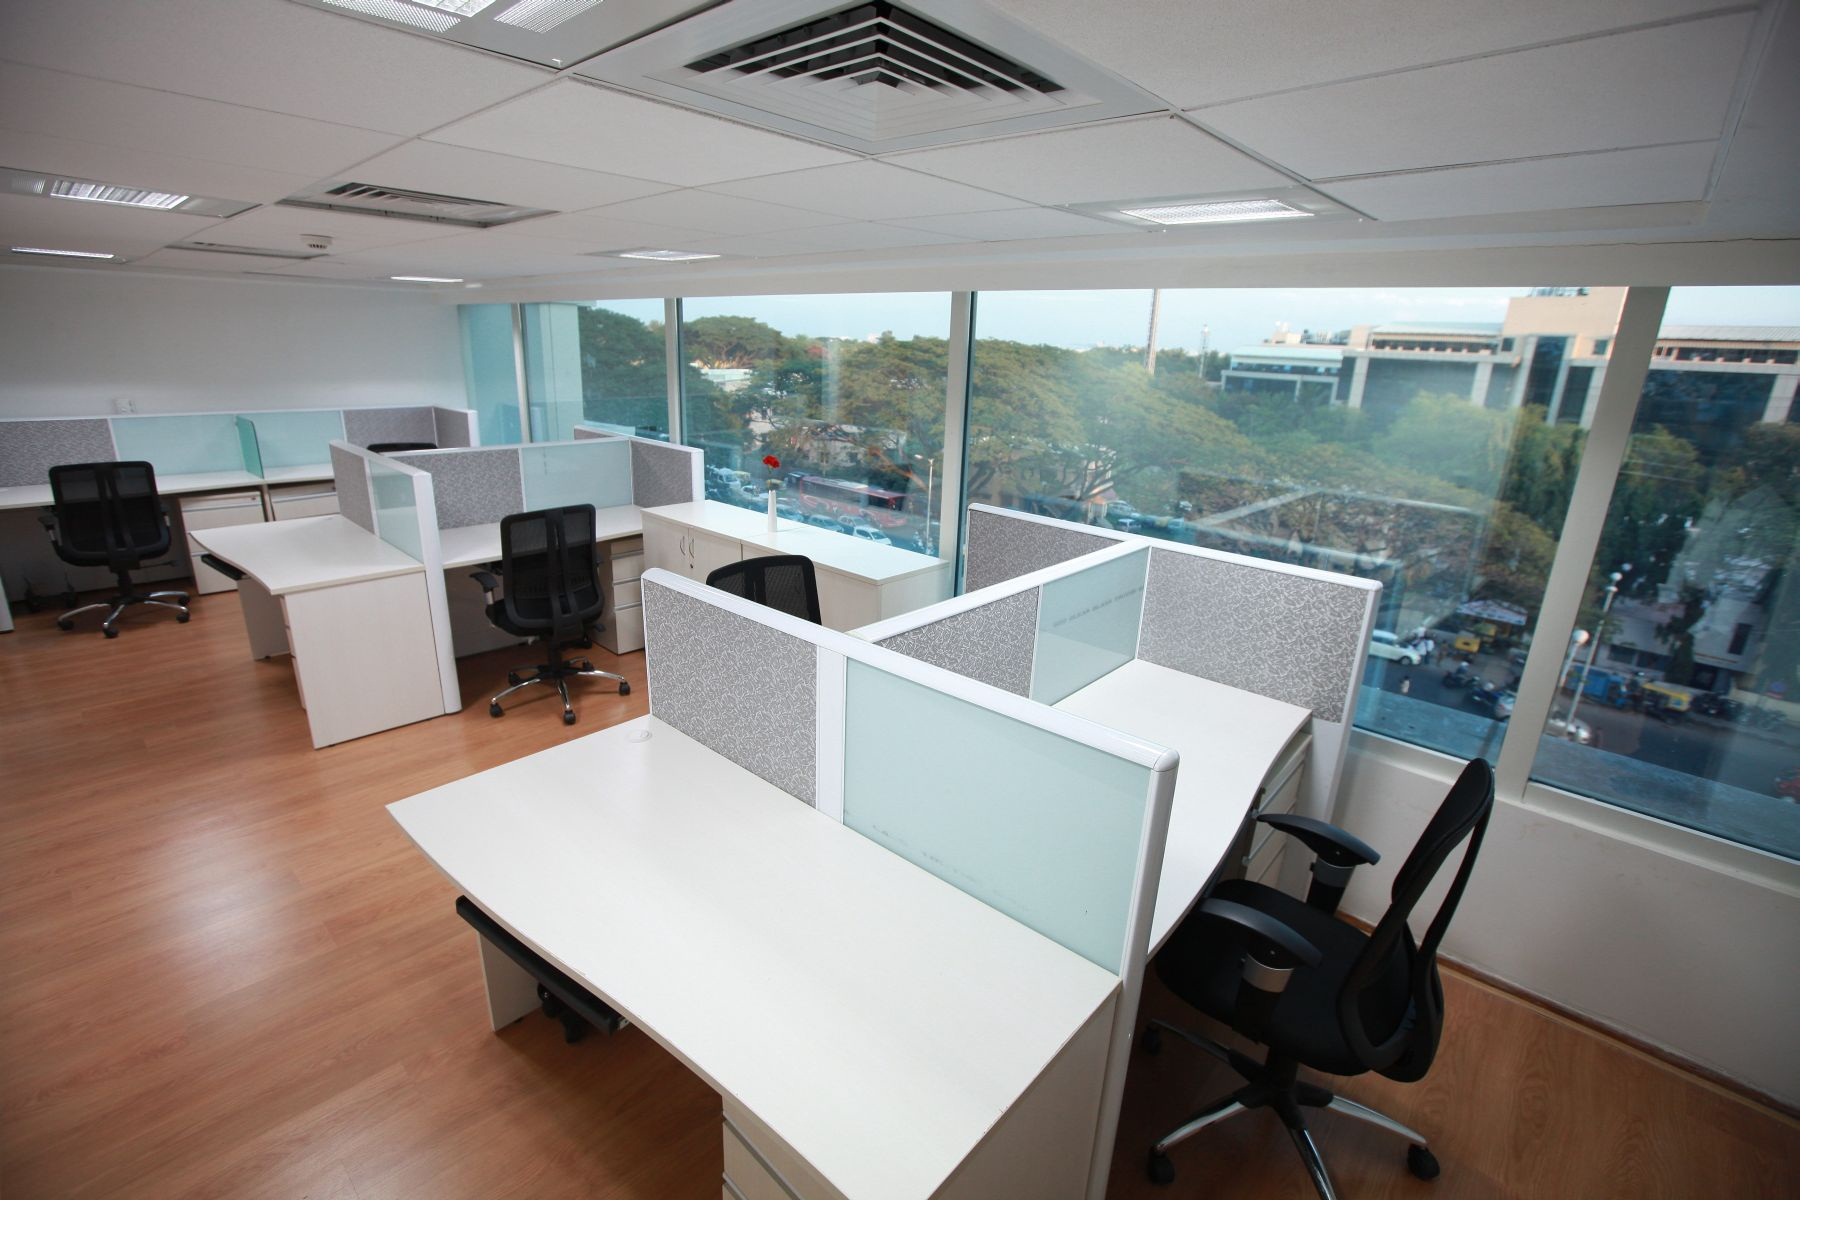 workstations ranging from 1 to 15 seater cabins with the flexibility for expansion